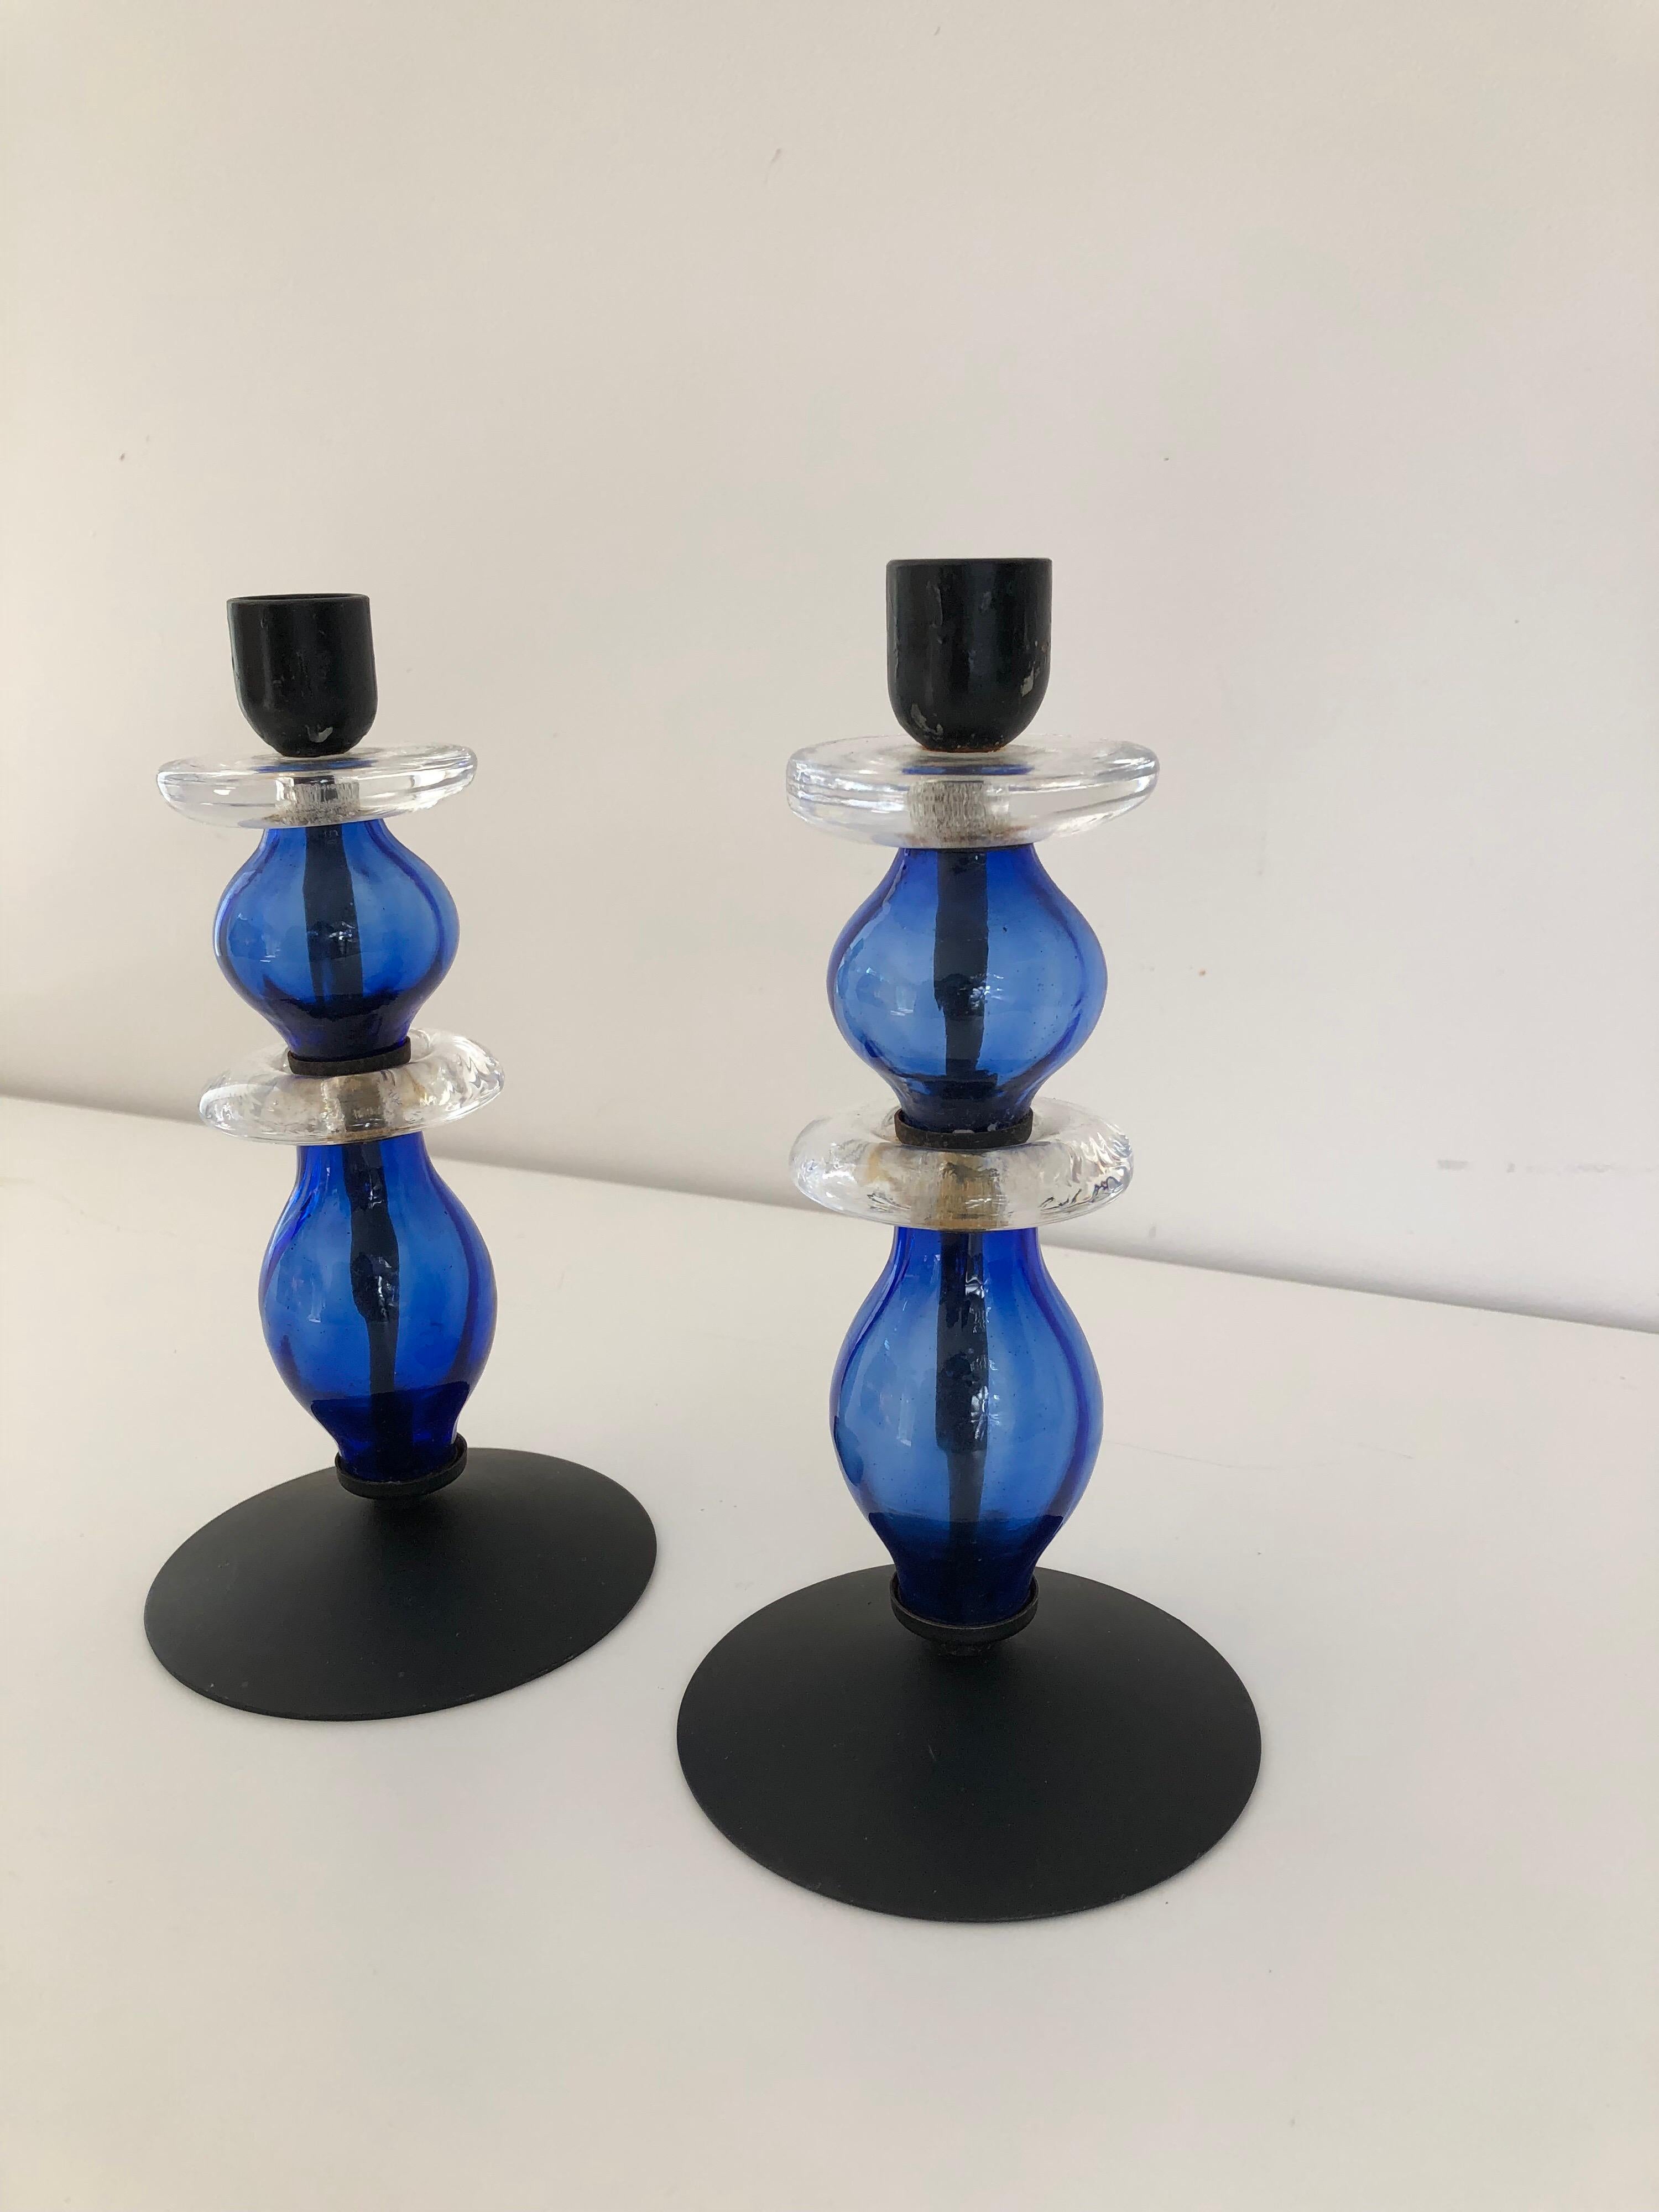 A rare pair of double tier glass and black painted metal candlesticks by Erik Hoglund for Boda. Consisting of two tiers of blue and clear glass.